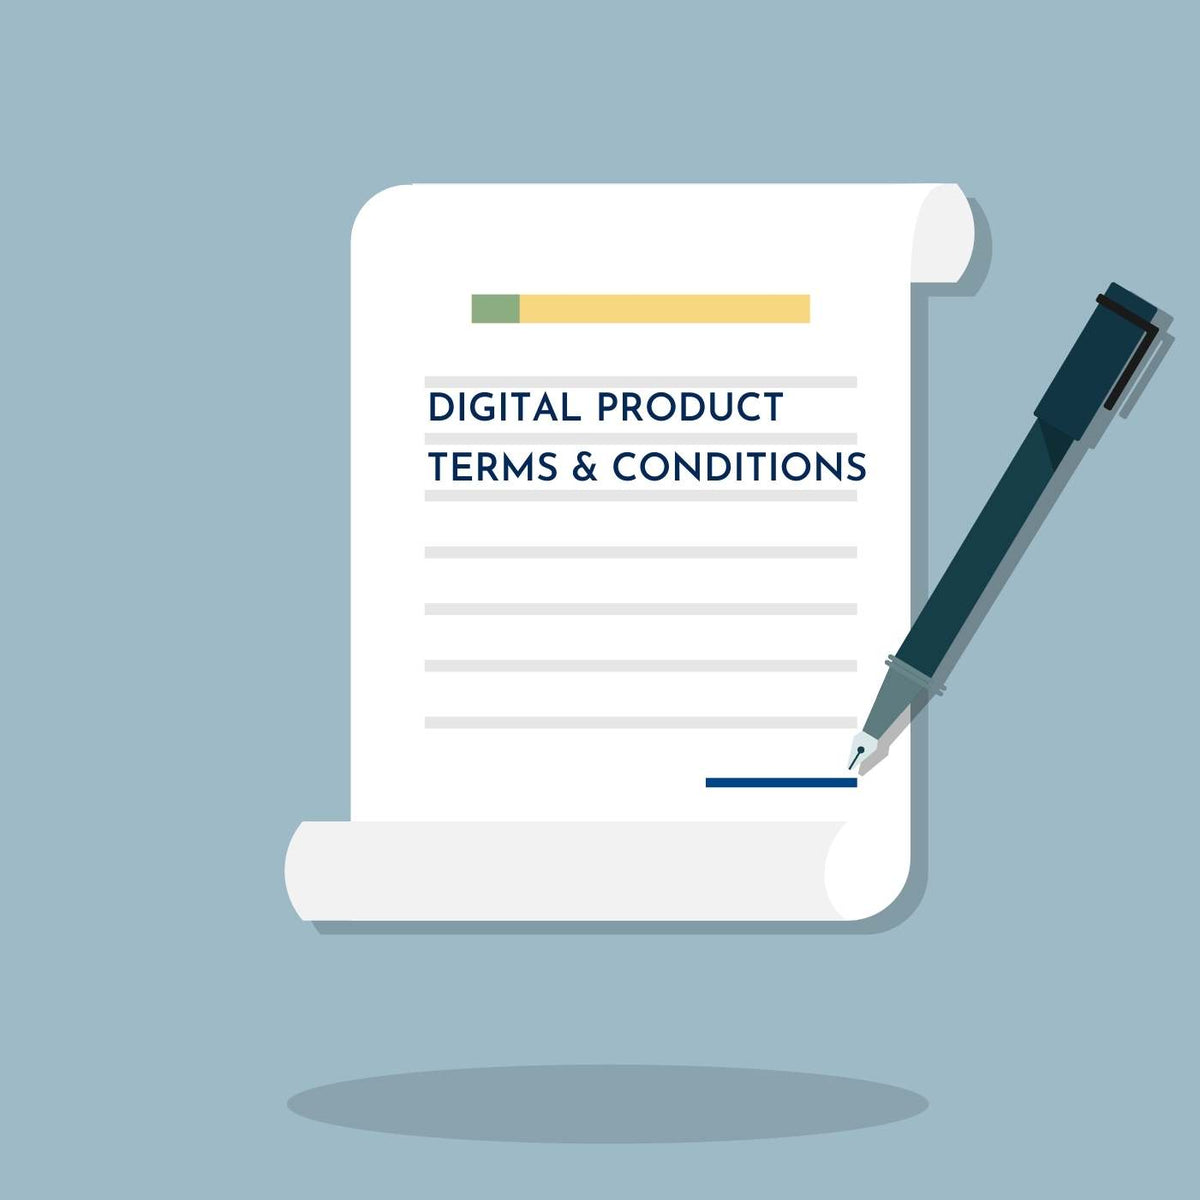 Digital Product Terms and Conditions